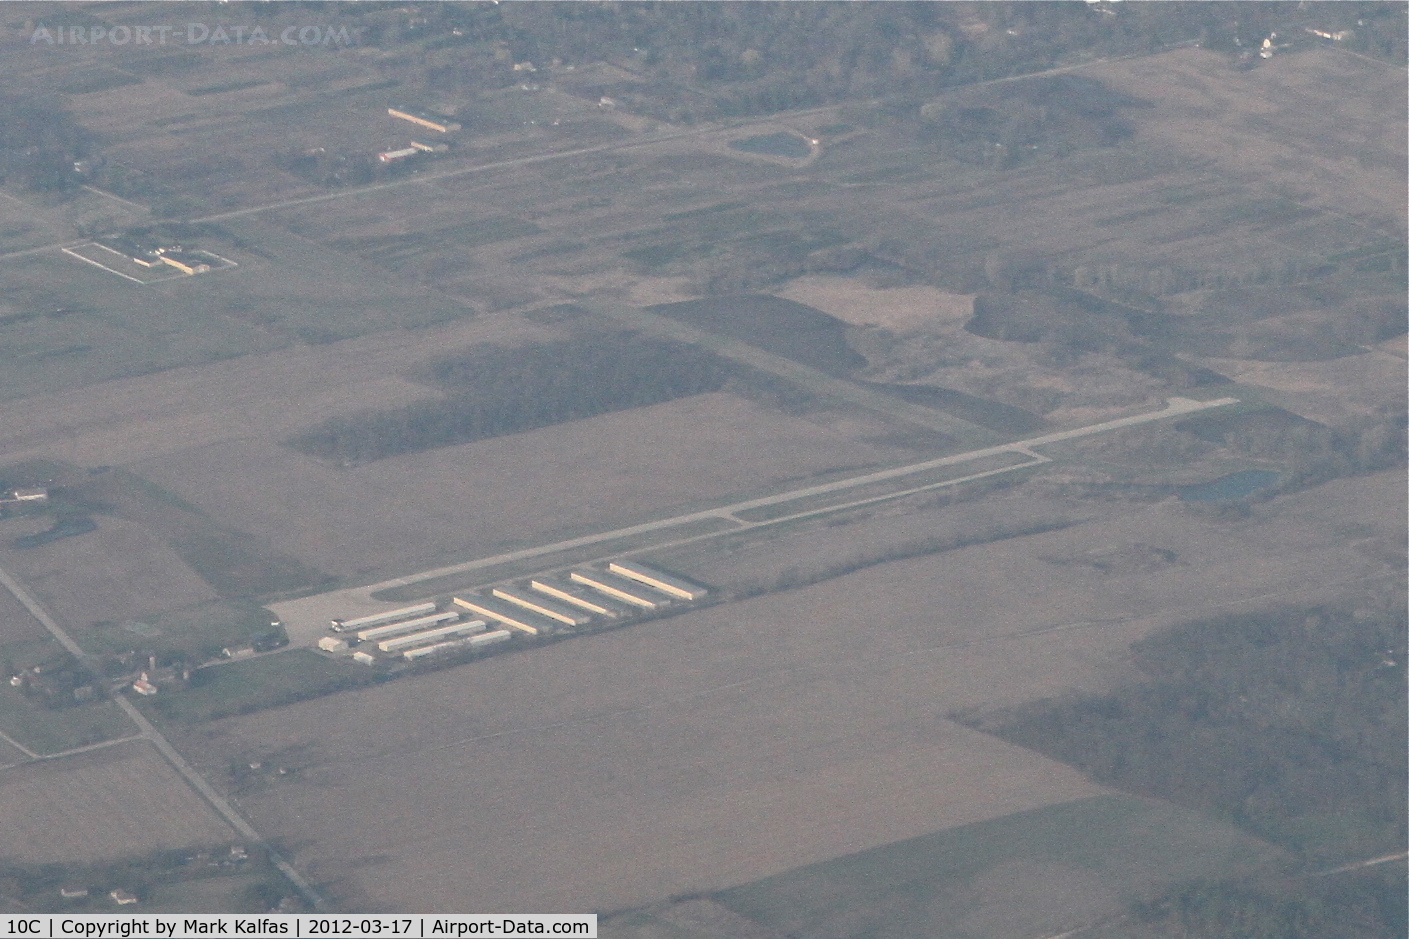 Galt Field Airport (10C) - Wonder Lake, Illinois - Galt Field as seen on a 121 heading descending through 8,900' on the JVL5 arrival into O'Hare.